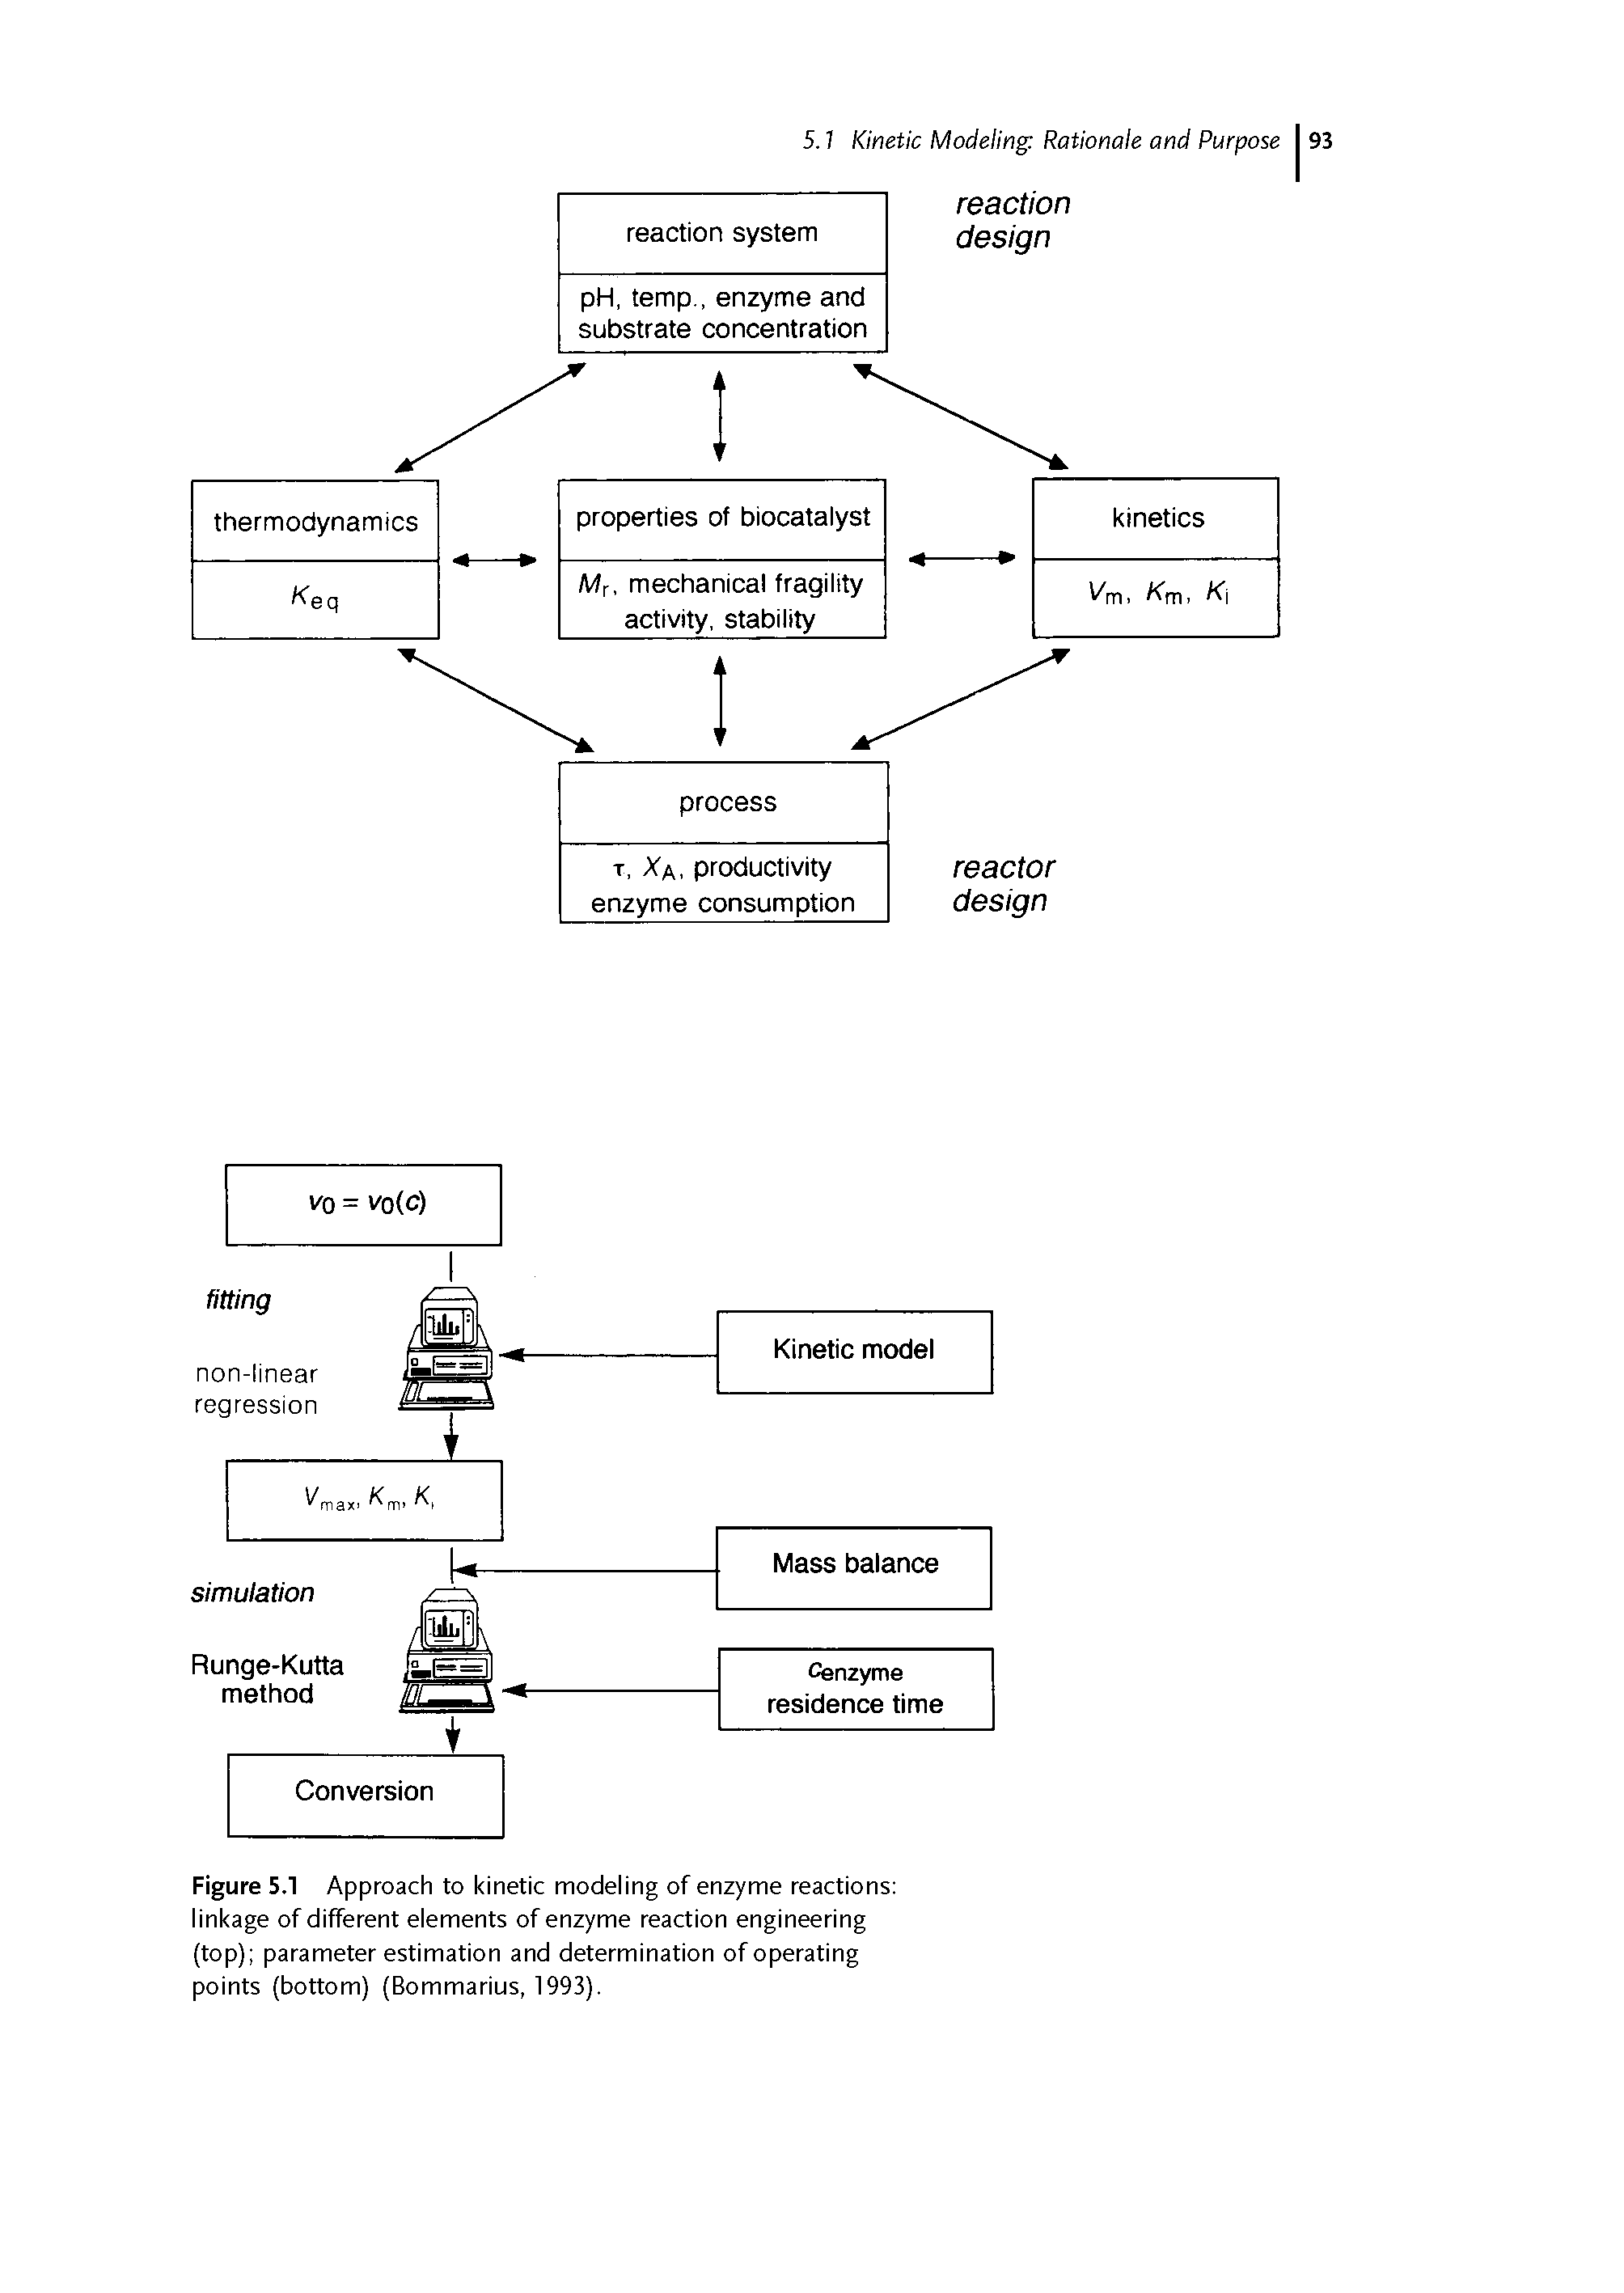 Figure 5.1 Approach to kinetic modeling of enzyme reactions linkage of different elements of enzyme reaction engineering (top) parameter estimation and determination of operating points (bottom) (Bommarius, 1993).